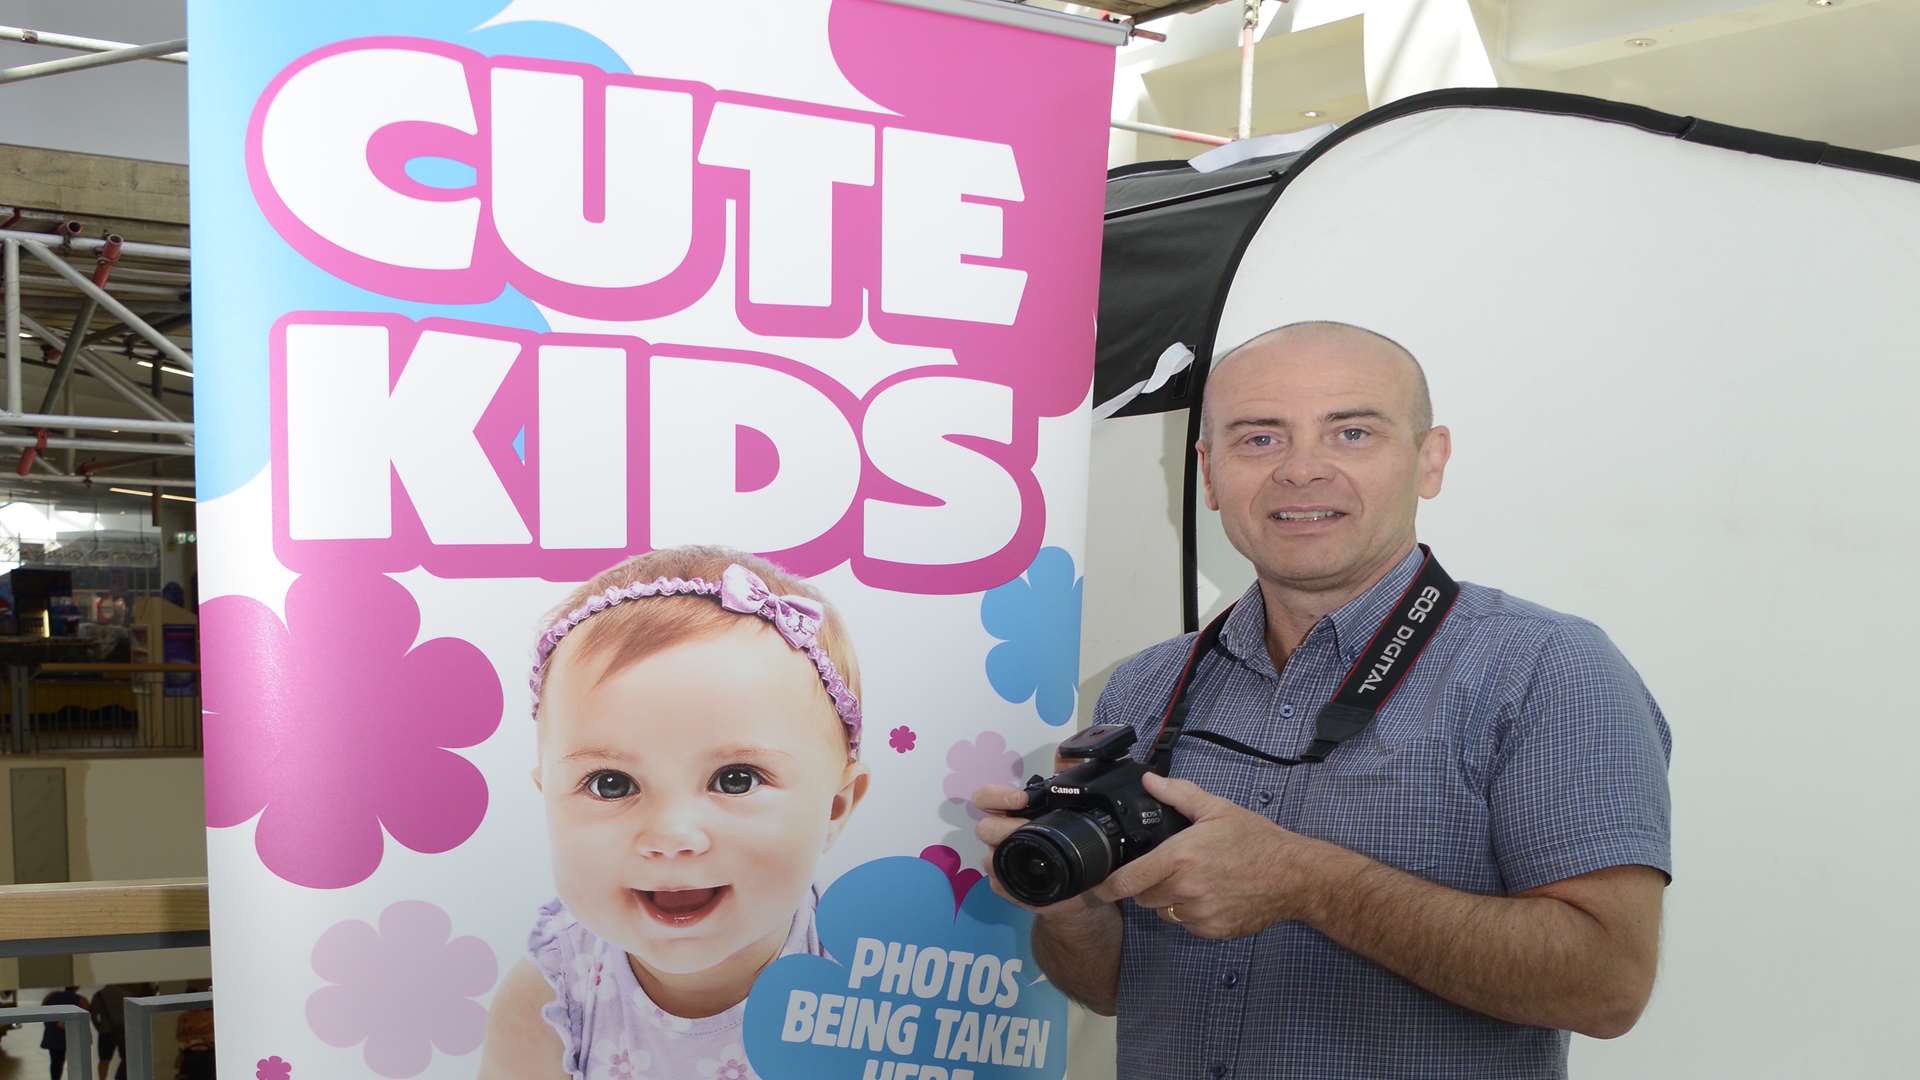 Cute Kids photographer Andy Nield who was based at The Mall, Maidstone.